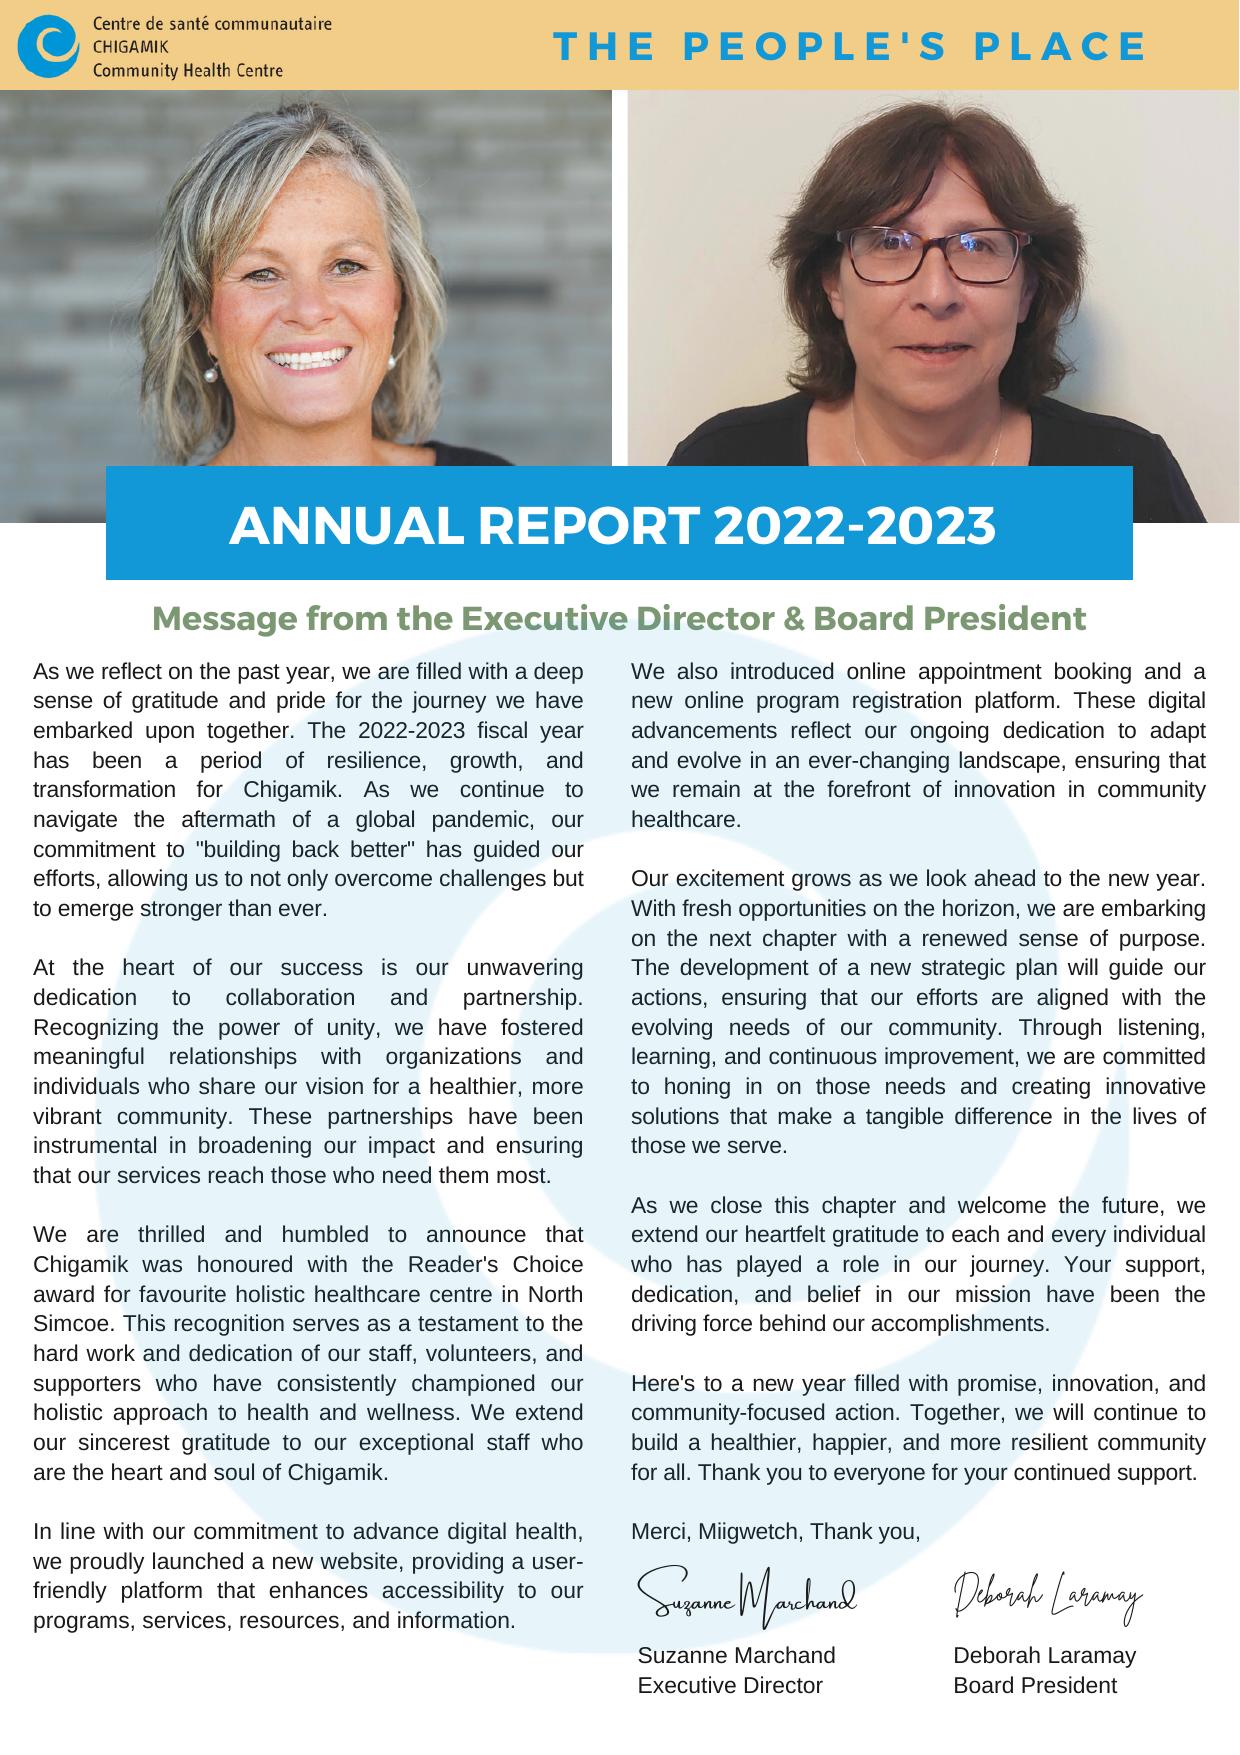 CHIGAMIK 2023 Annual Report